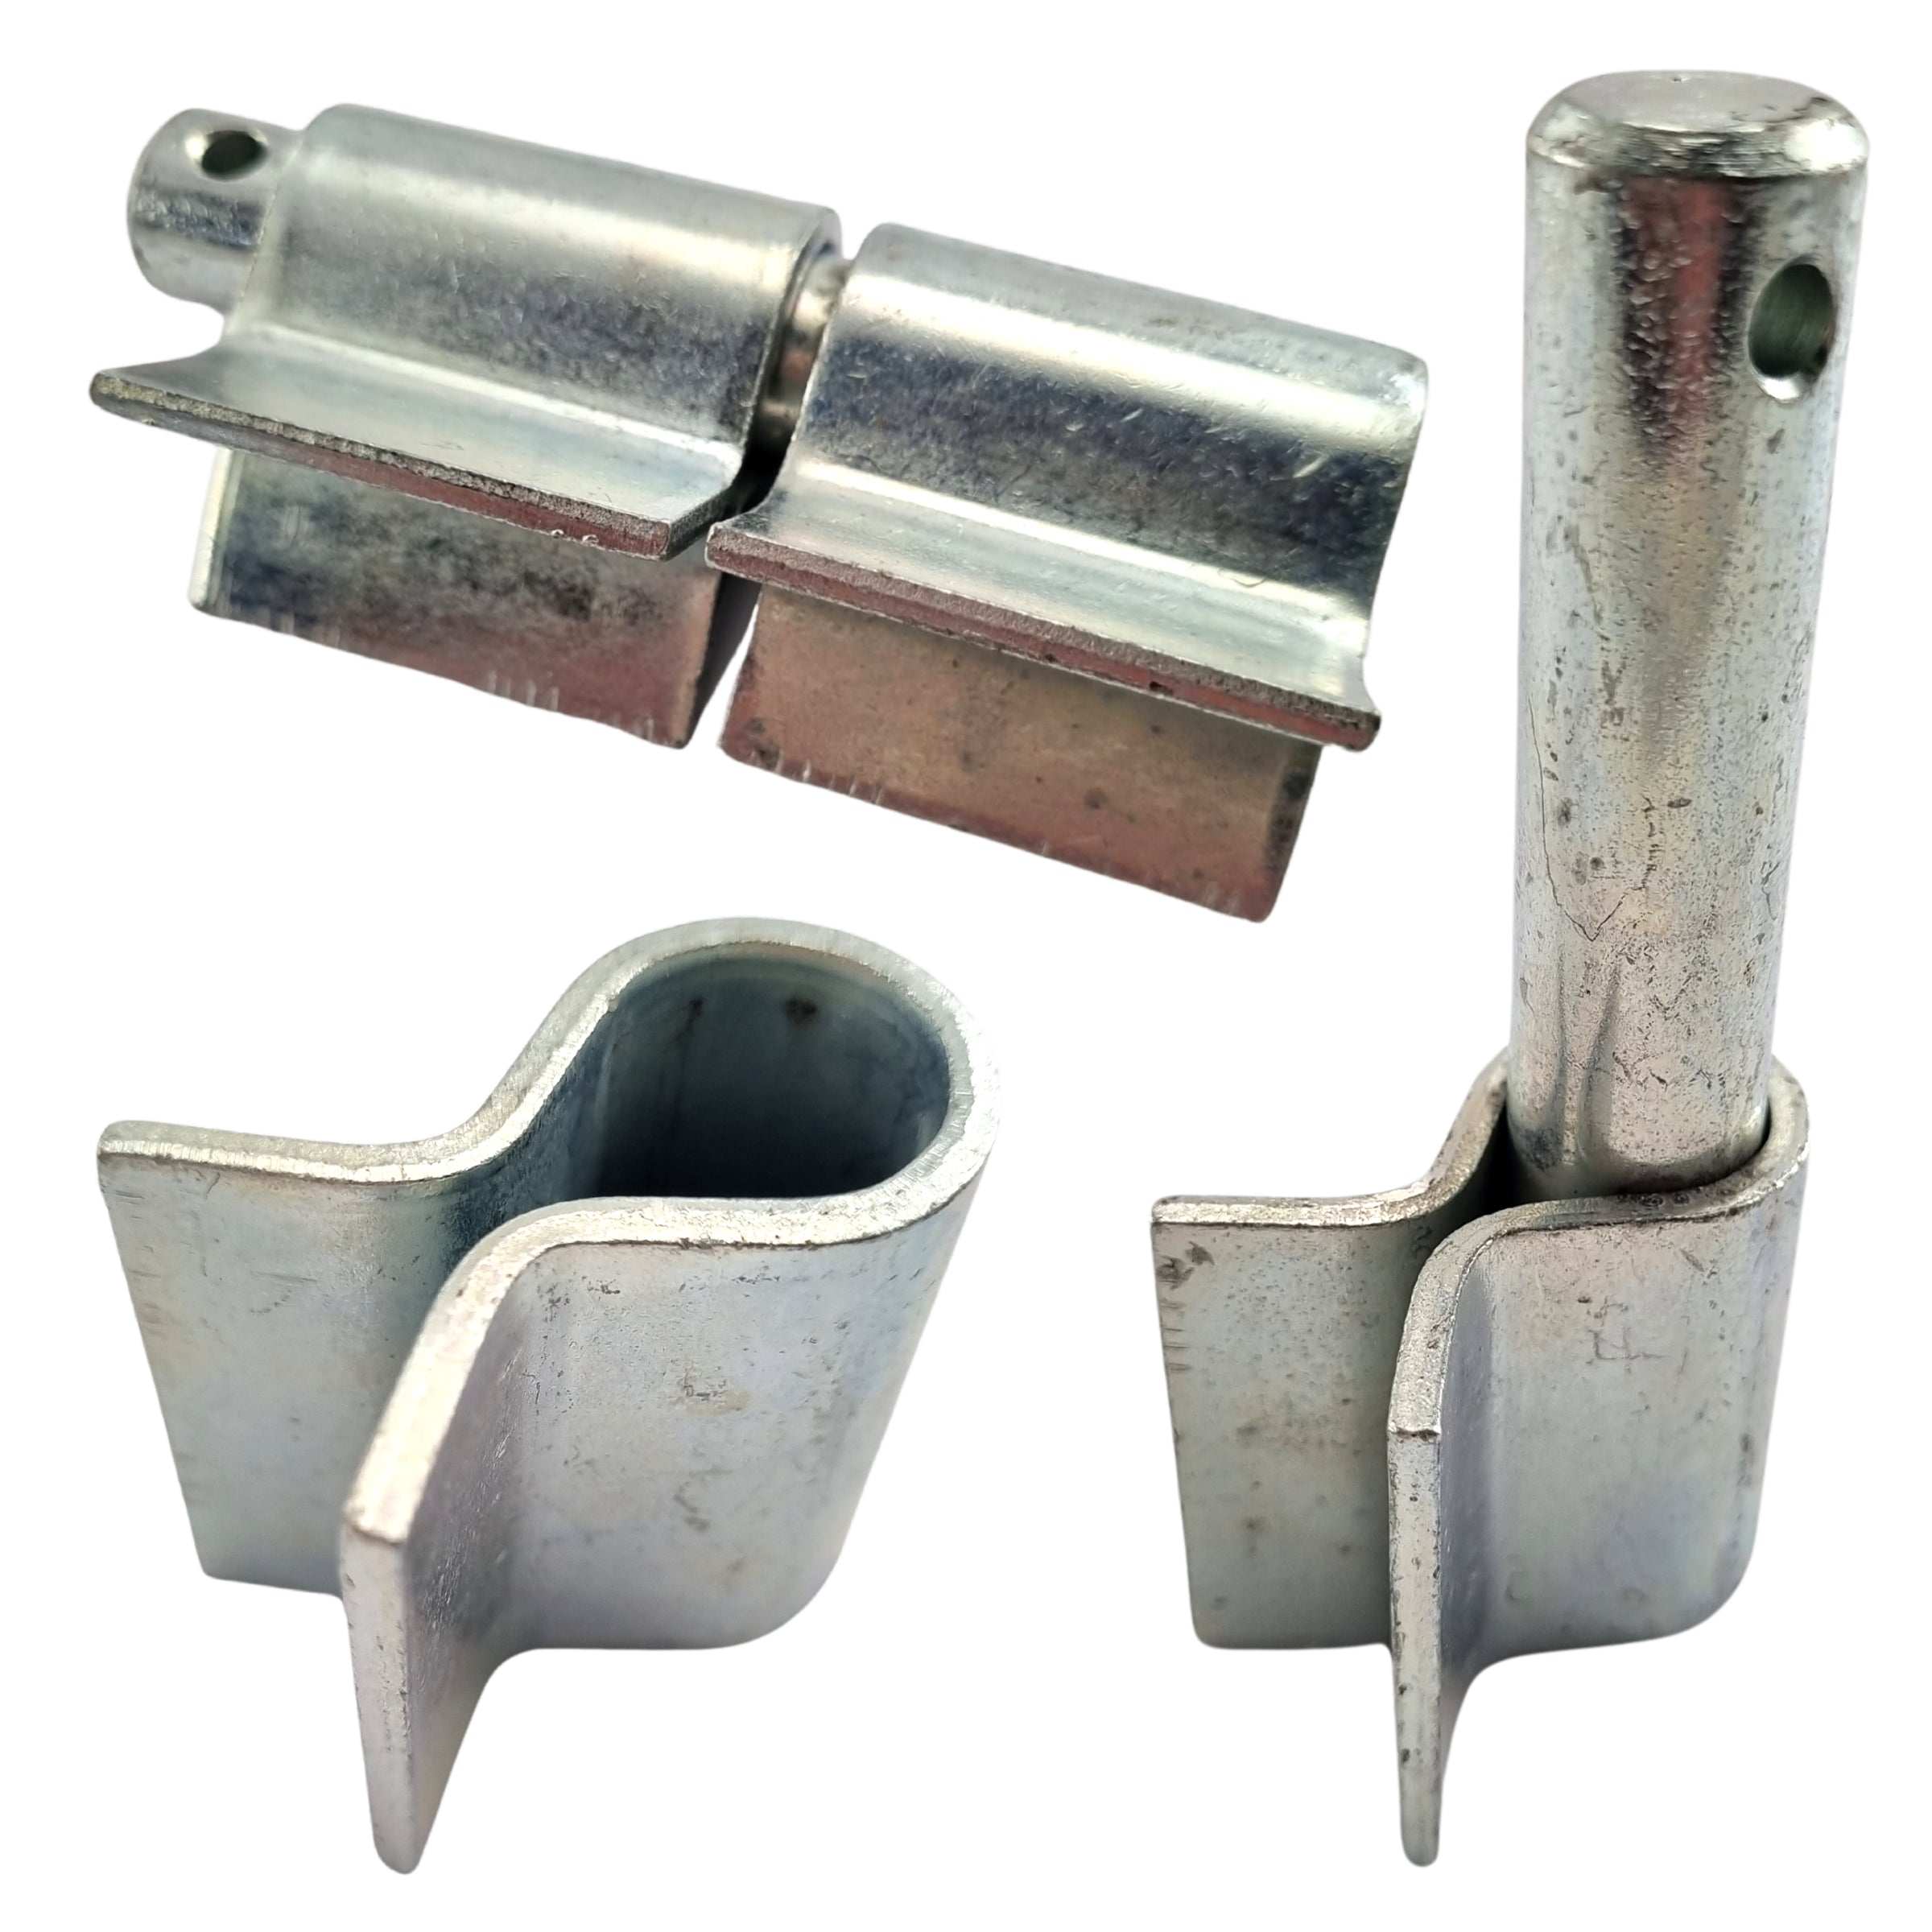 Weld On Fittings  - Zinc Plated. Assembly, Socket, Pin. Australian made. Shop fence and gate fittings online. Chain.com.au. Australia wide shipping.